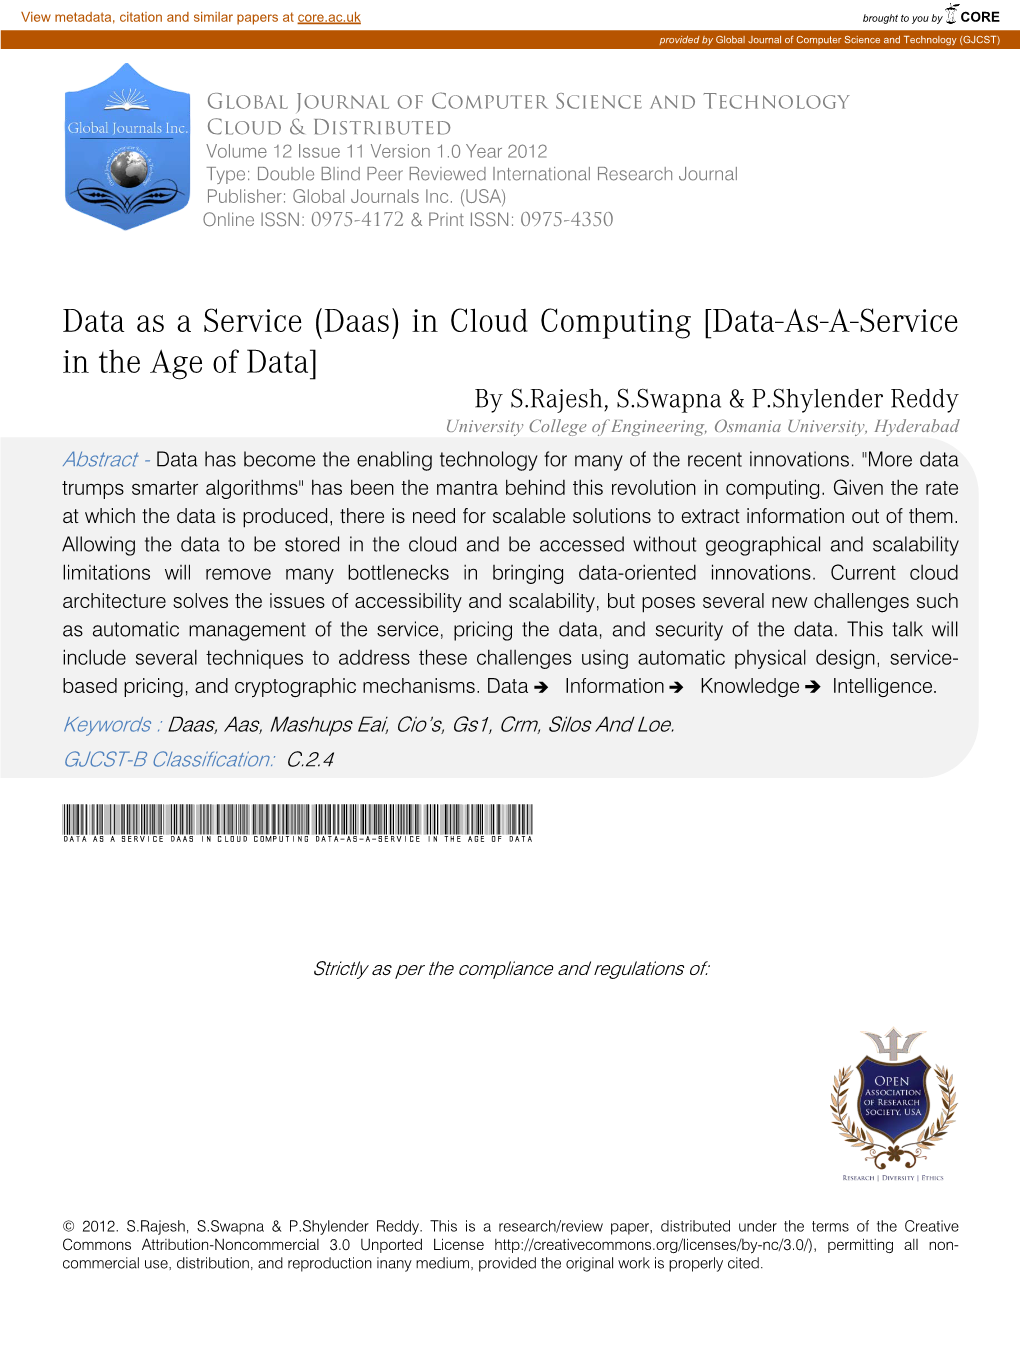 Data As a Service (Daas) in Cloud Computing [Data-As-A-Service in the Age of Data]